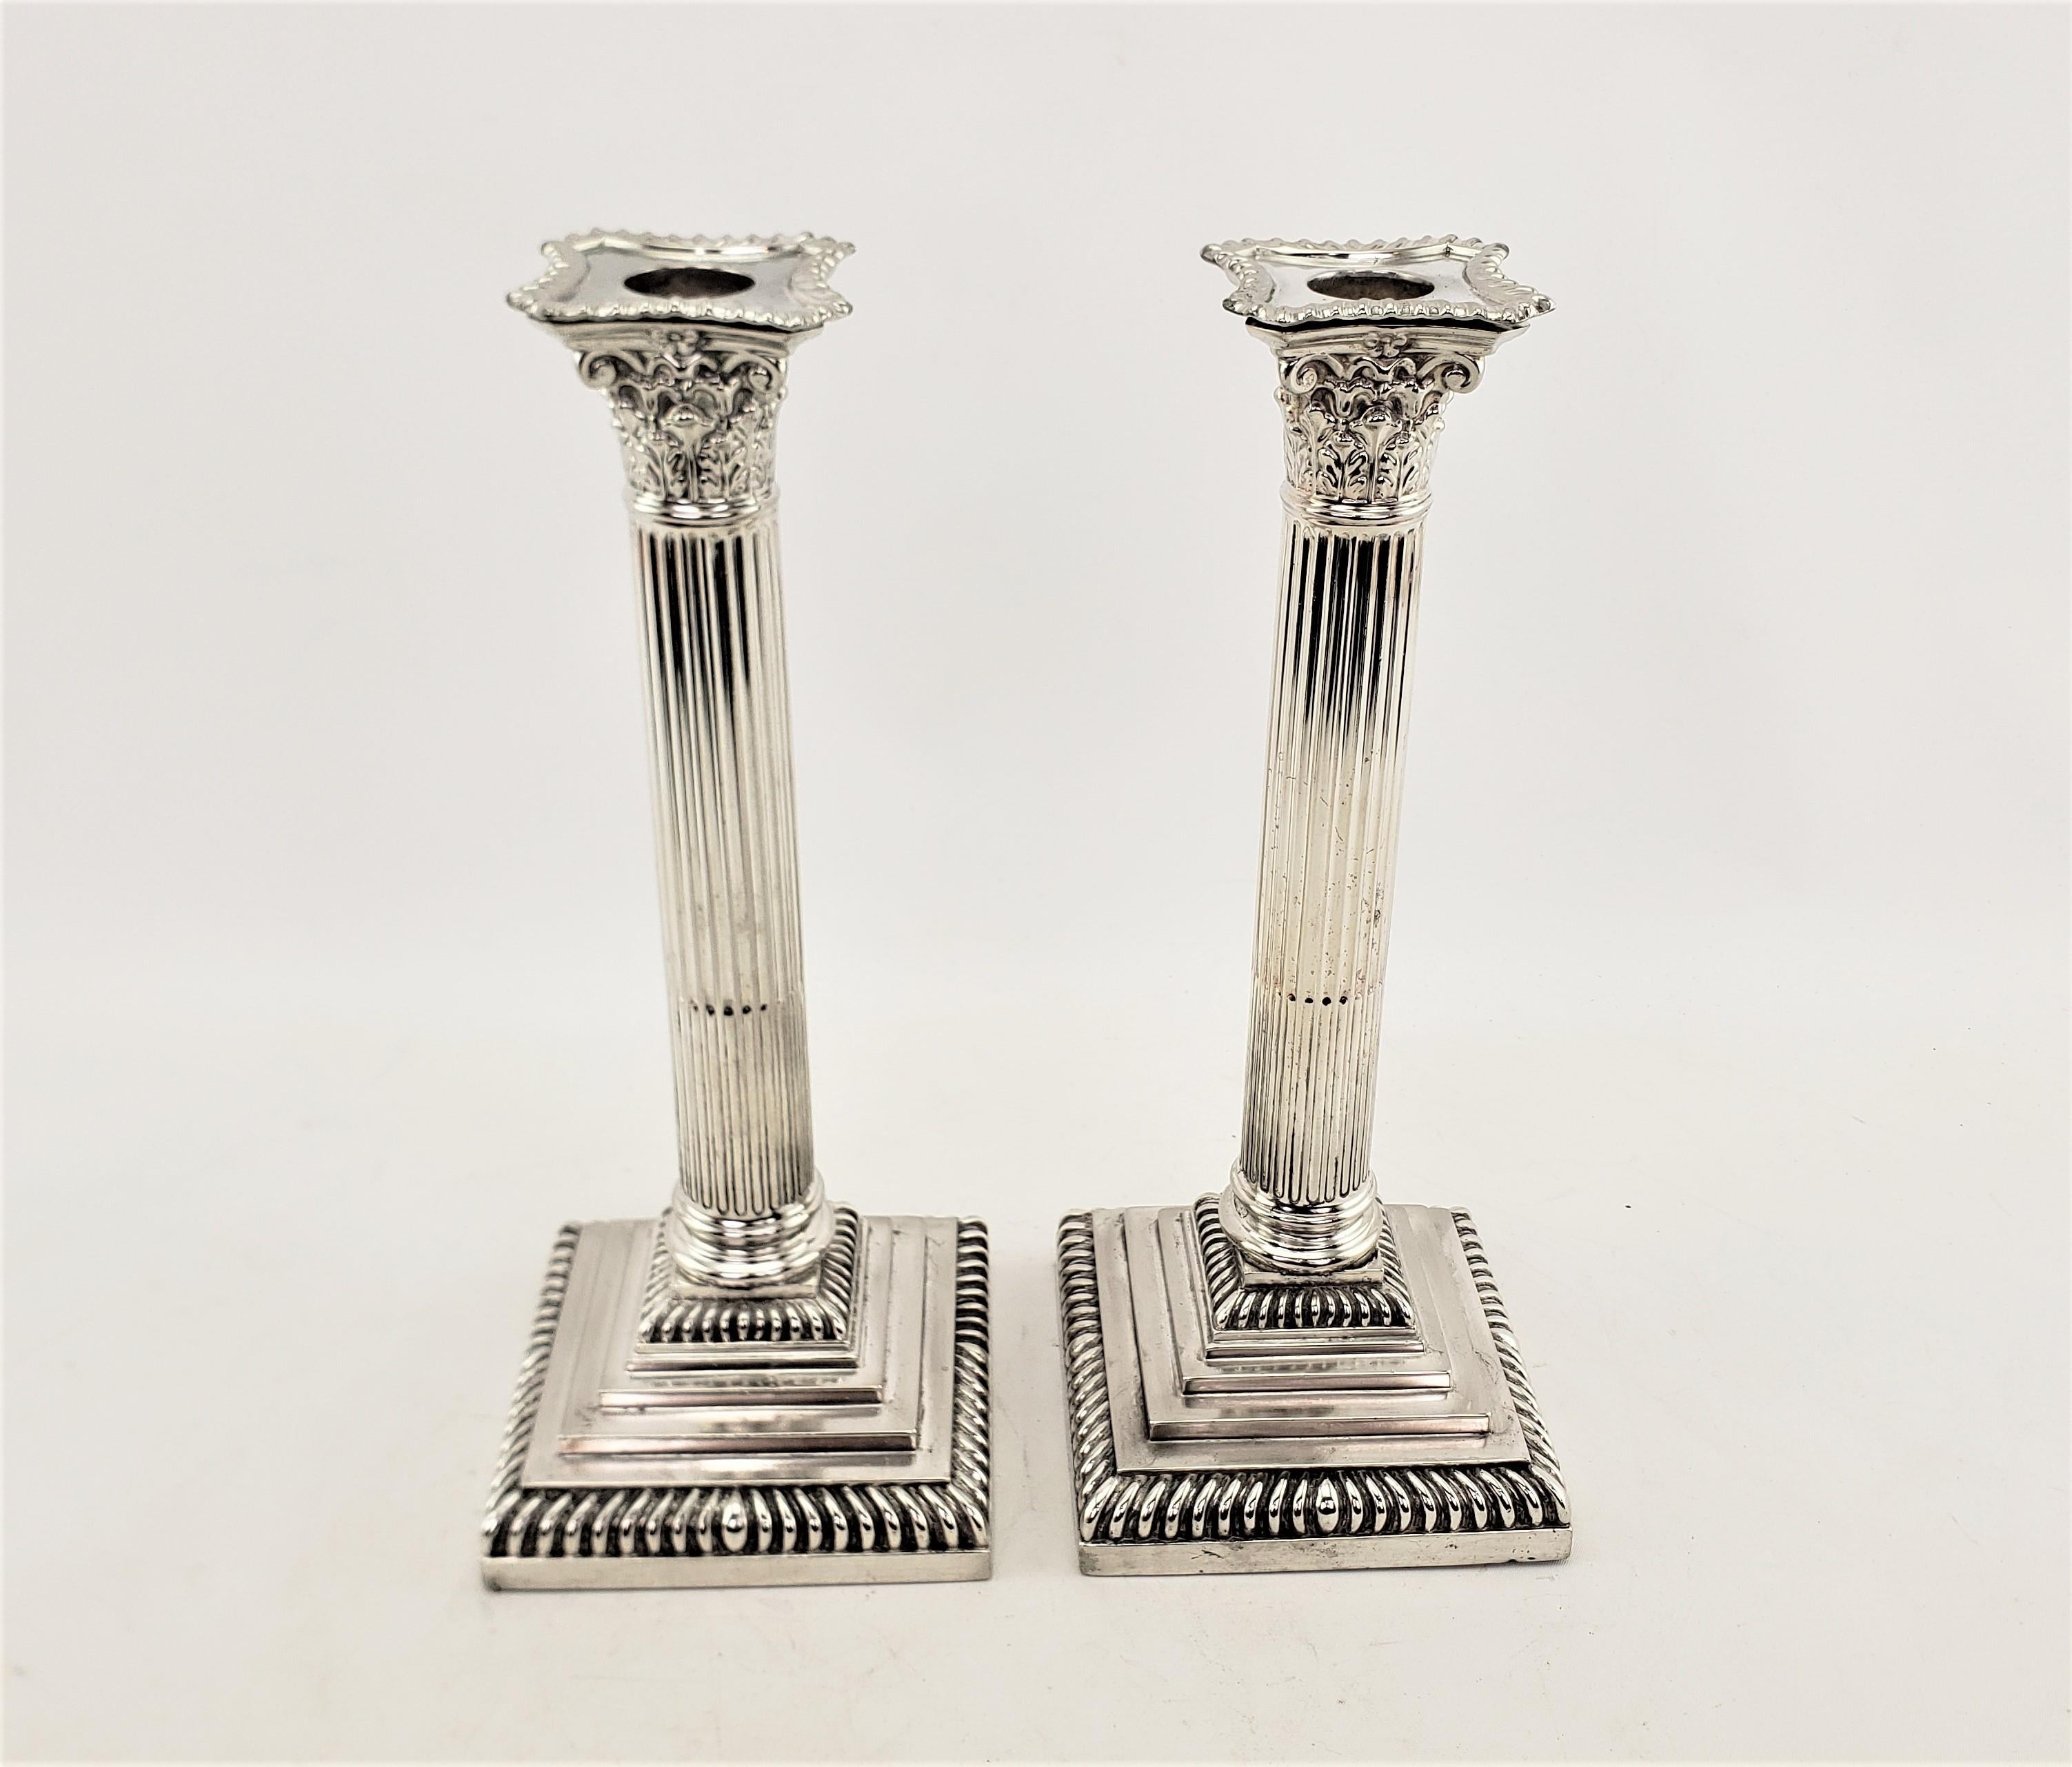 This pair of antique candlesticks are hallmarked by an unknown maker, and presumed to originate from England and date to approximately 1920 and done in a Greek Revival style. The candlesticks are composed of silver plate and are done as Corinthian